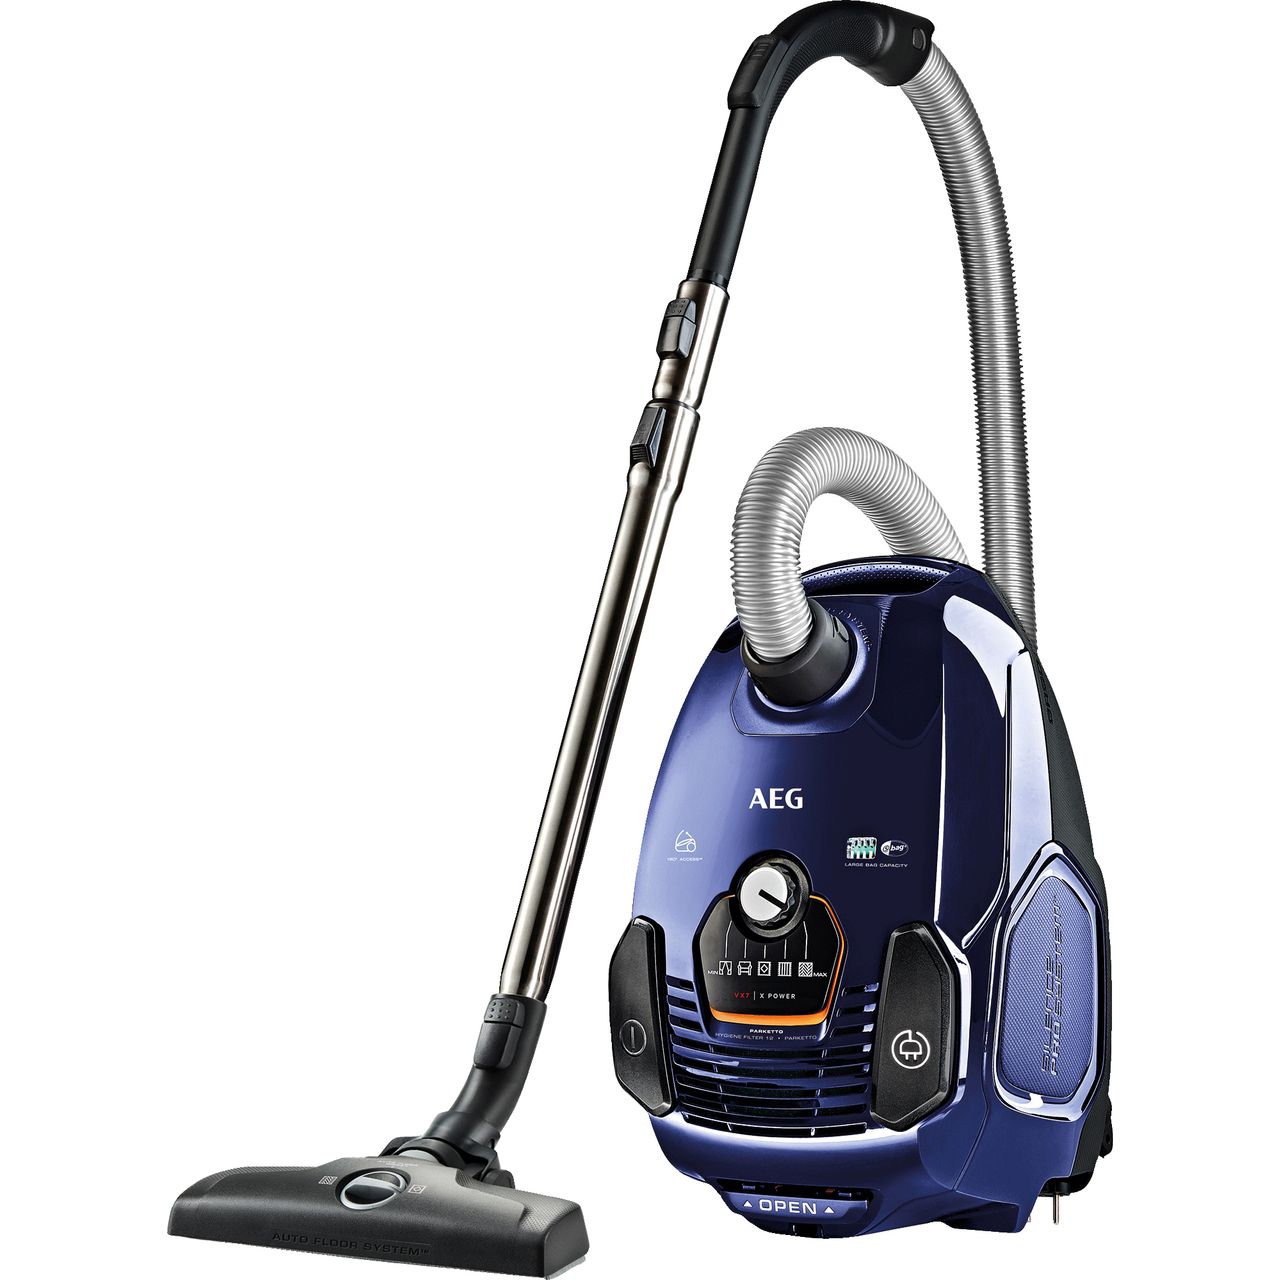 AEG VX7-2-DB Cylinder Vacuum Cleaner Review